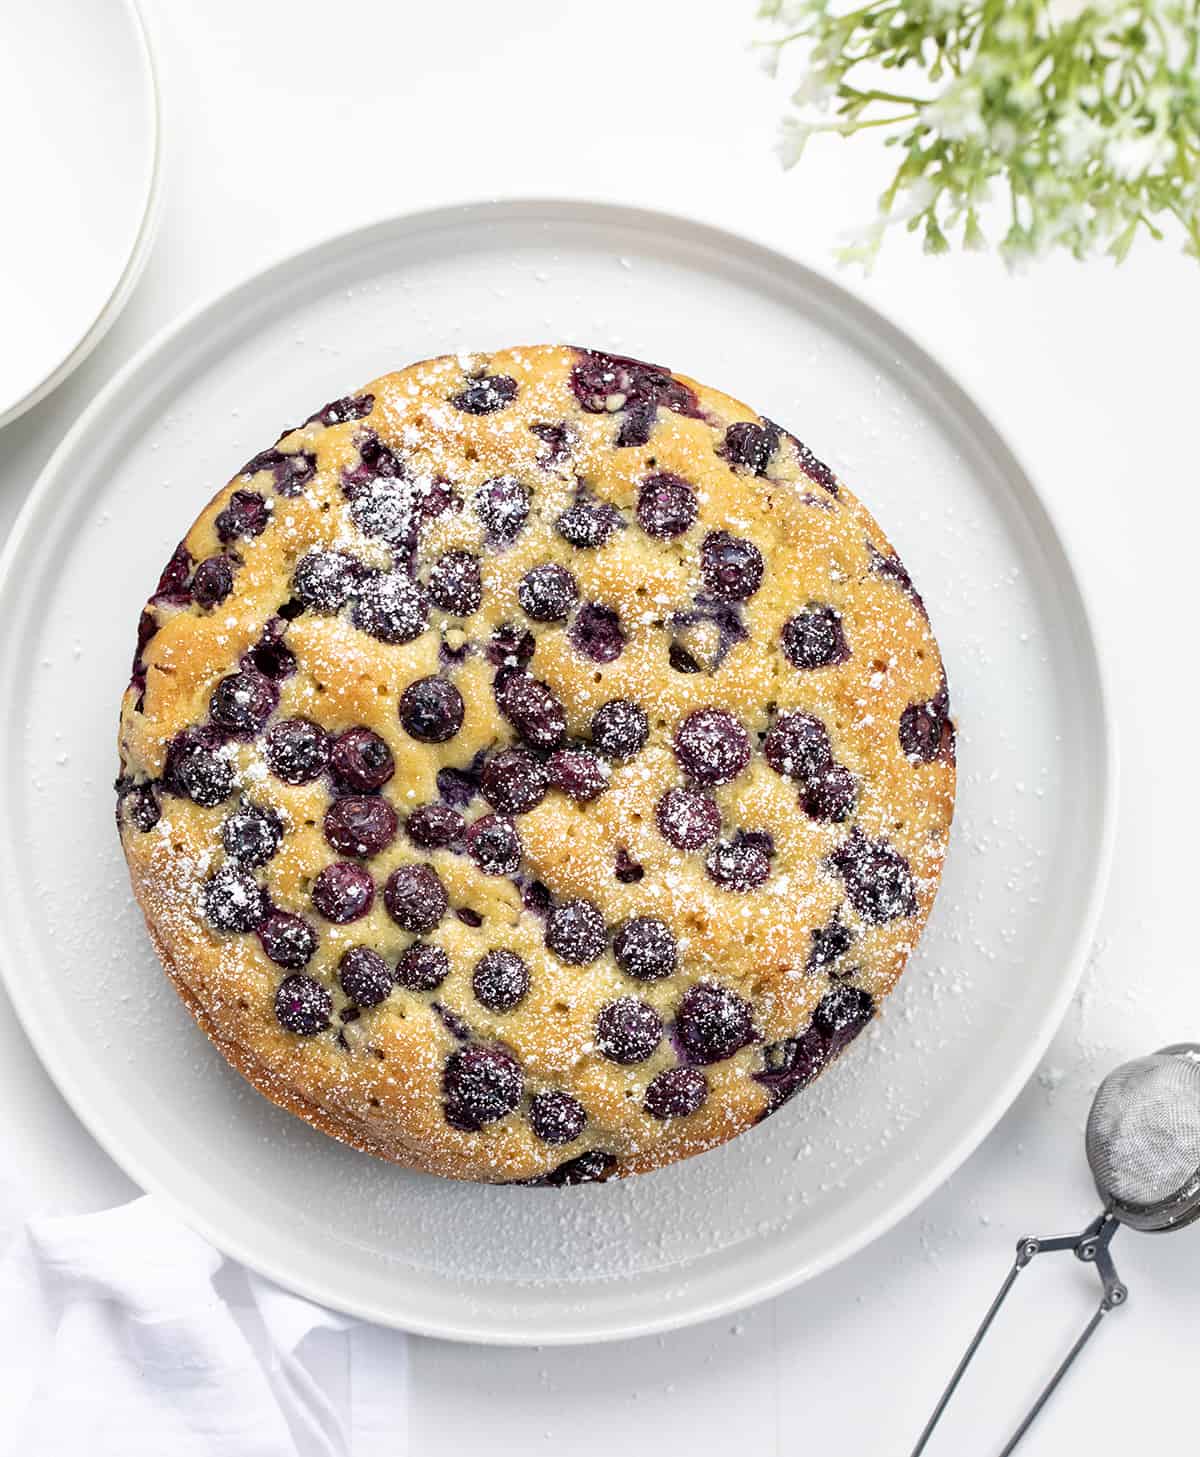 Whole Blueberry Breakfast Cake on a White Counter with Flowers.